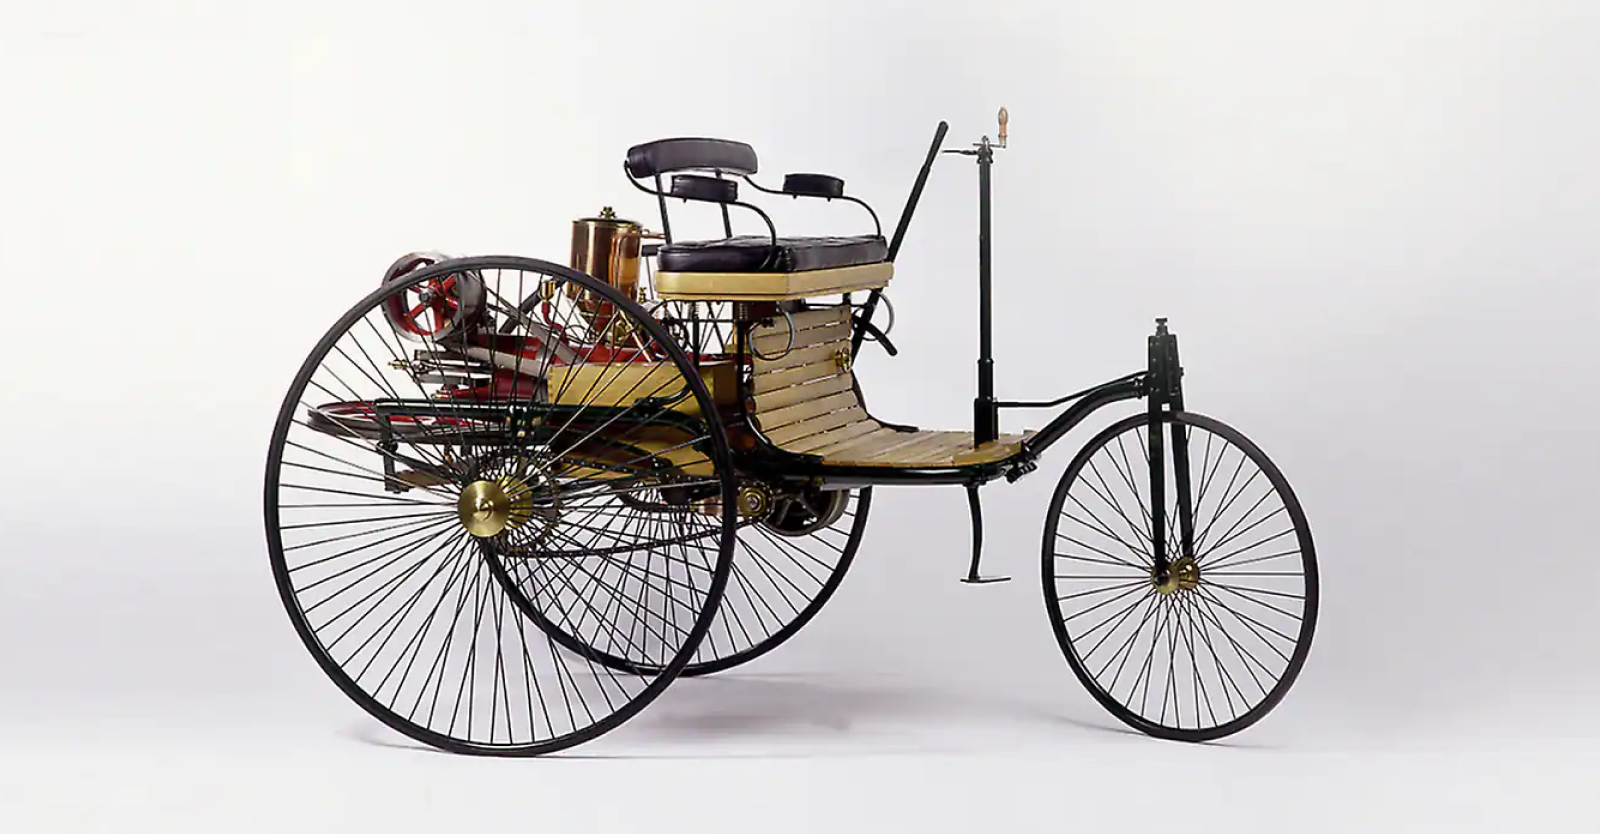 The first stationary gasoline engine developed by Carl Benz